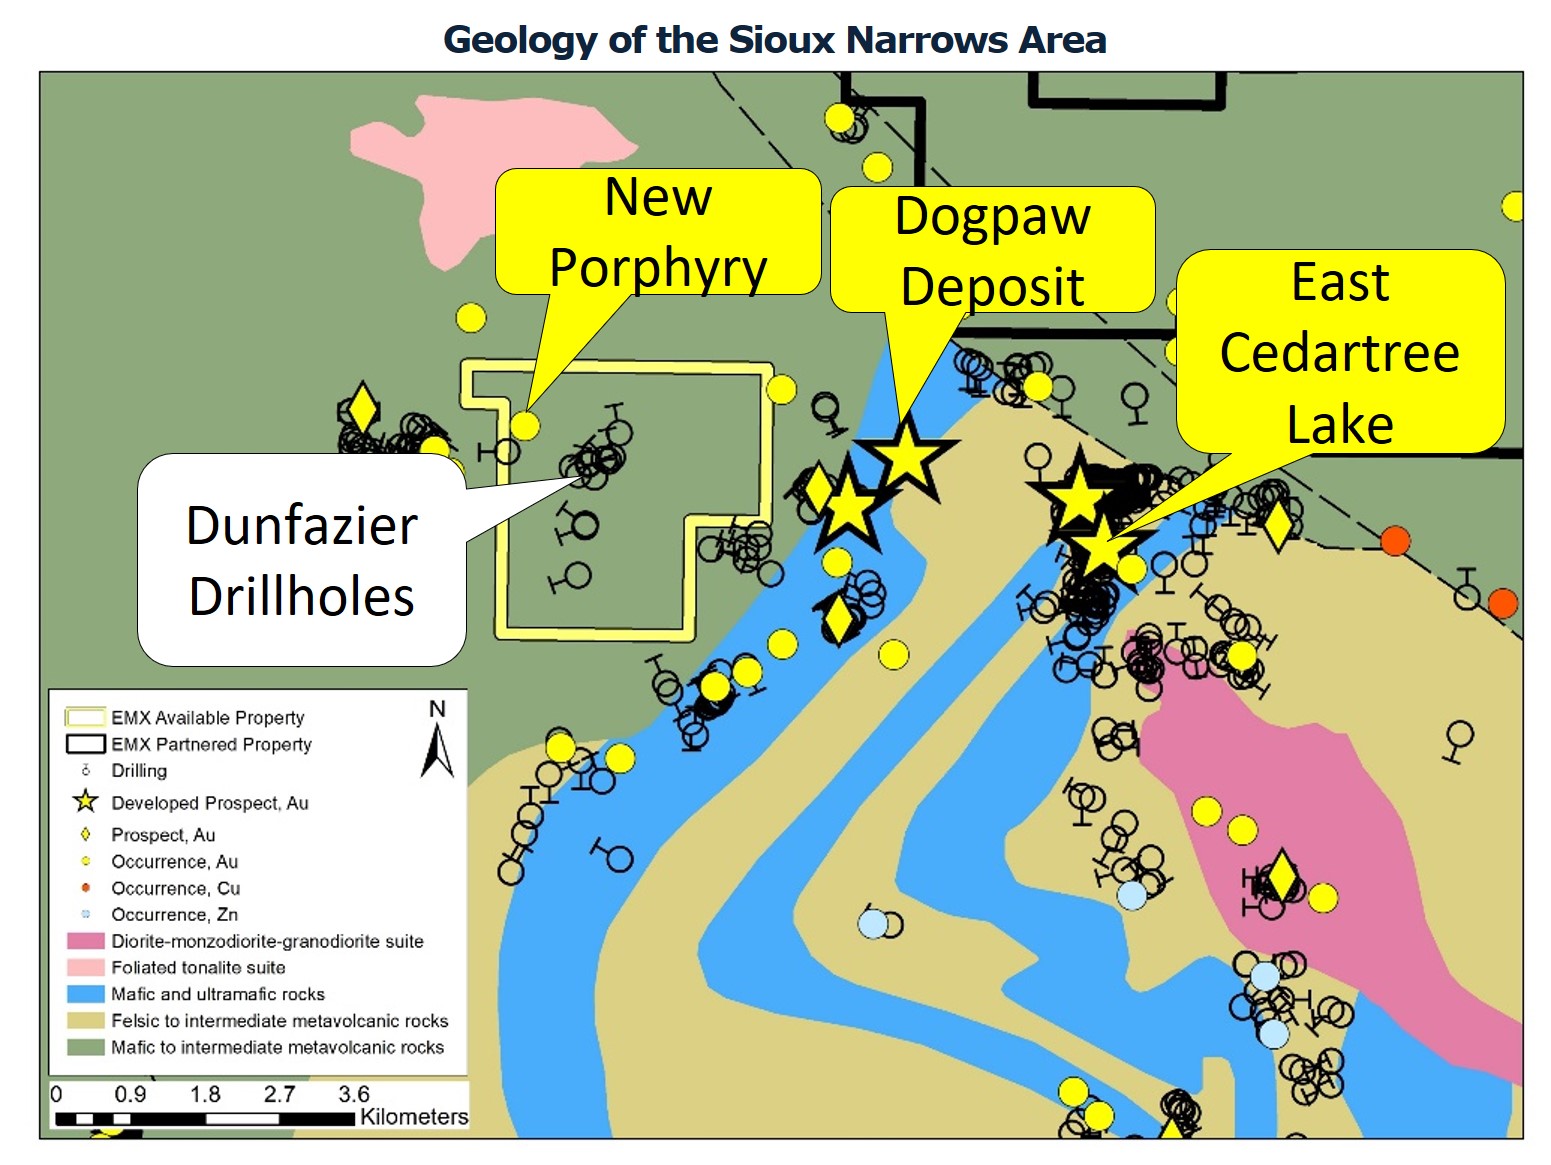 Geology map of Sioux Narrows area.